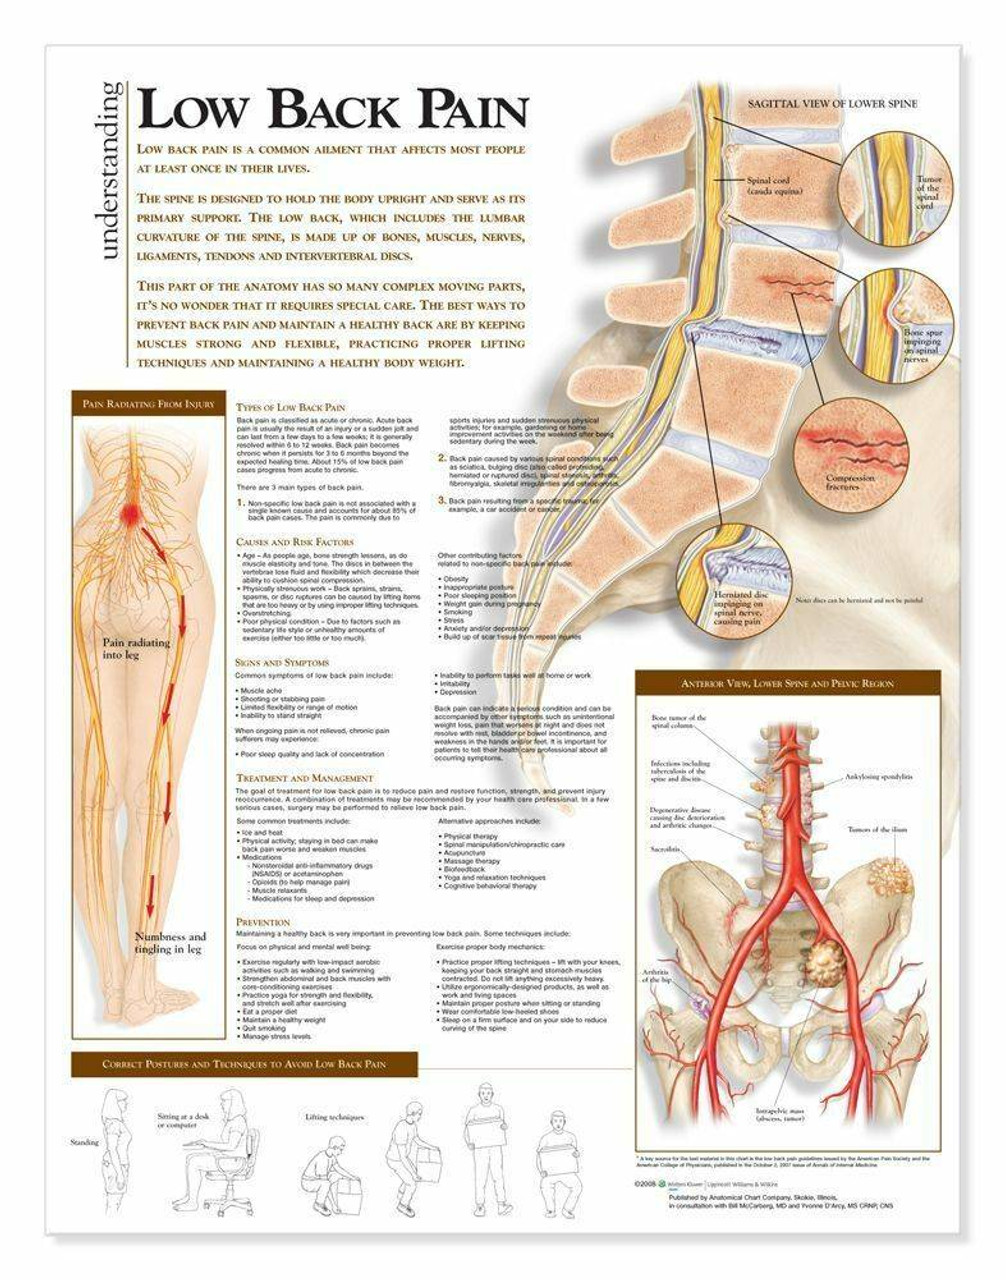 https://cdn11.bigcommerce.com/s-pimv2ff7eu/images/stencil/1280x1280/products/4699/18804/anatomical-chart-company-understanding-low-back-pain-laminated-anatomical-chart__21871.1606468570.jpg?c=1